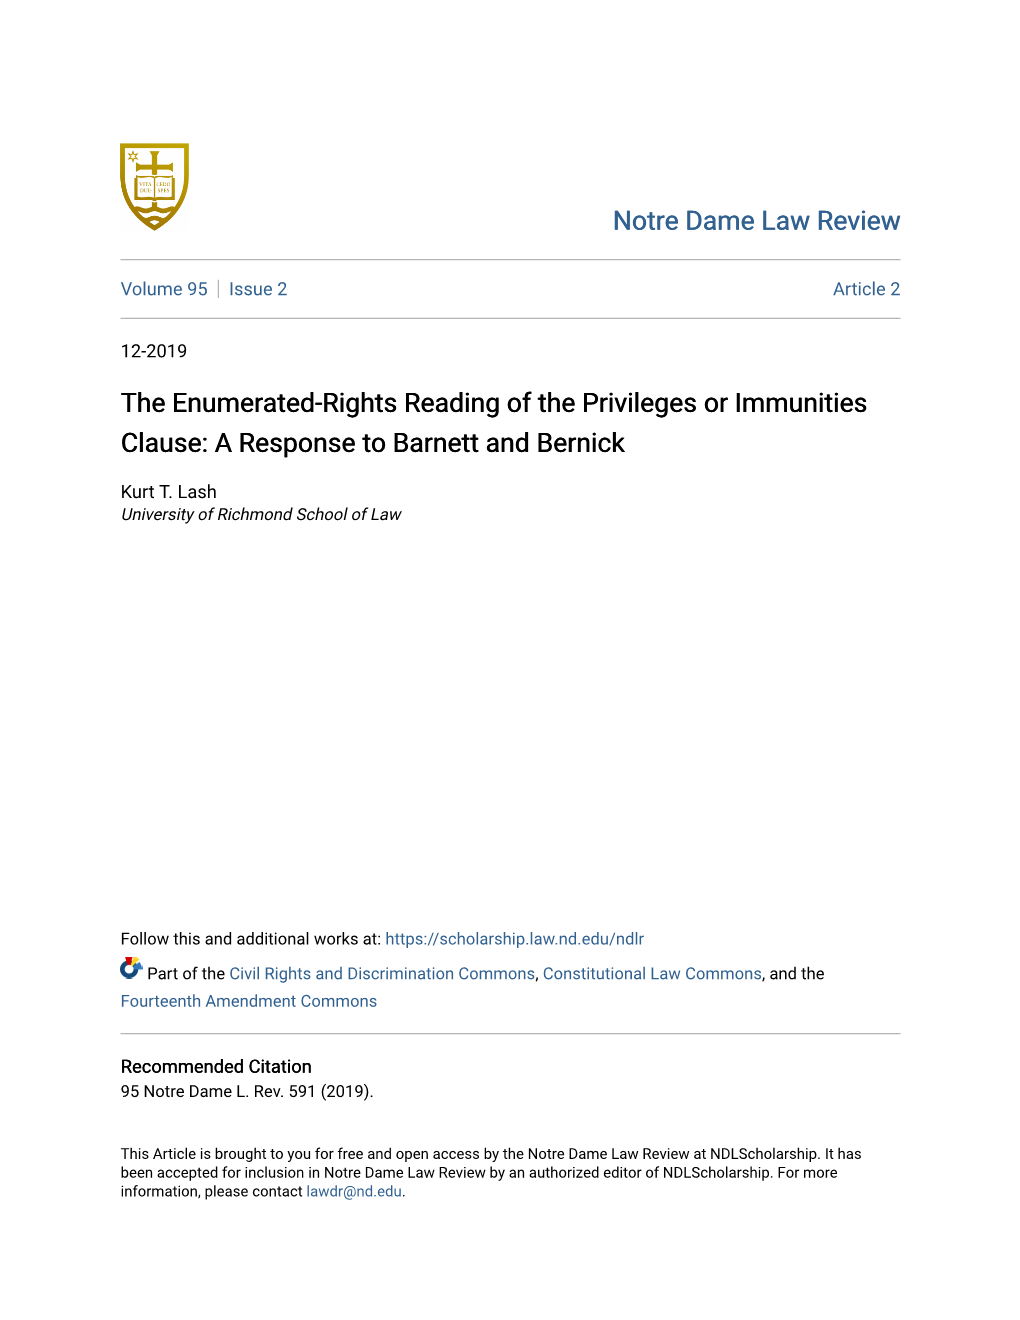 The Enumerated-Rights Reading of the Privileges Or Immunities Clause: a Response to Barnett and Bernick